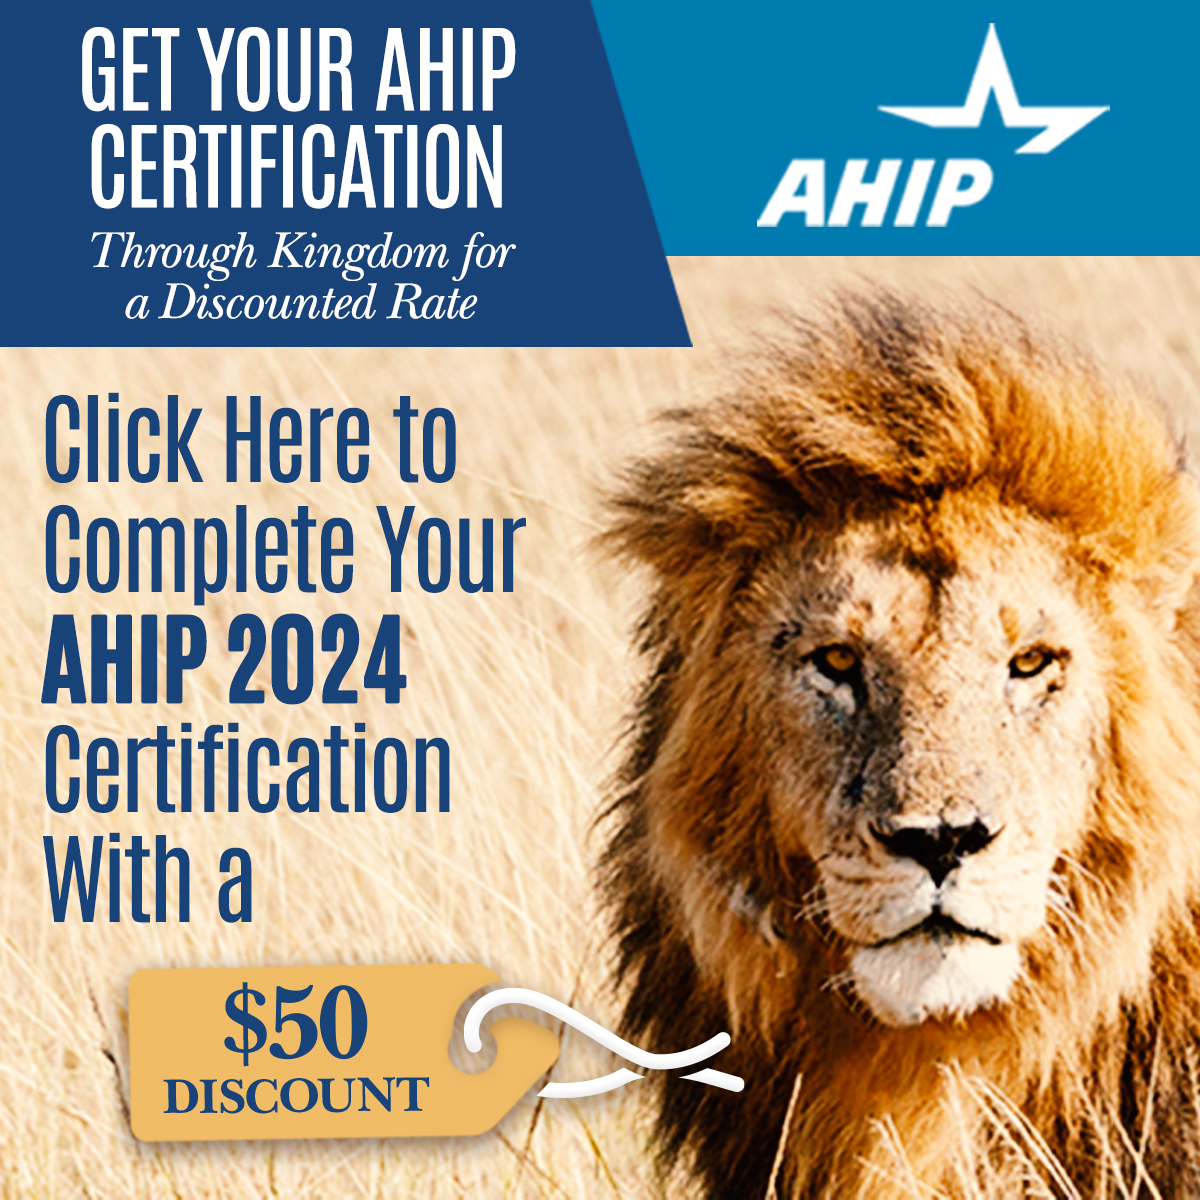 Get your AHIP certification through Kingdom for a discount rate. Click here to complete your AHIP 2023 certification with a $50 discount.